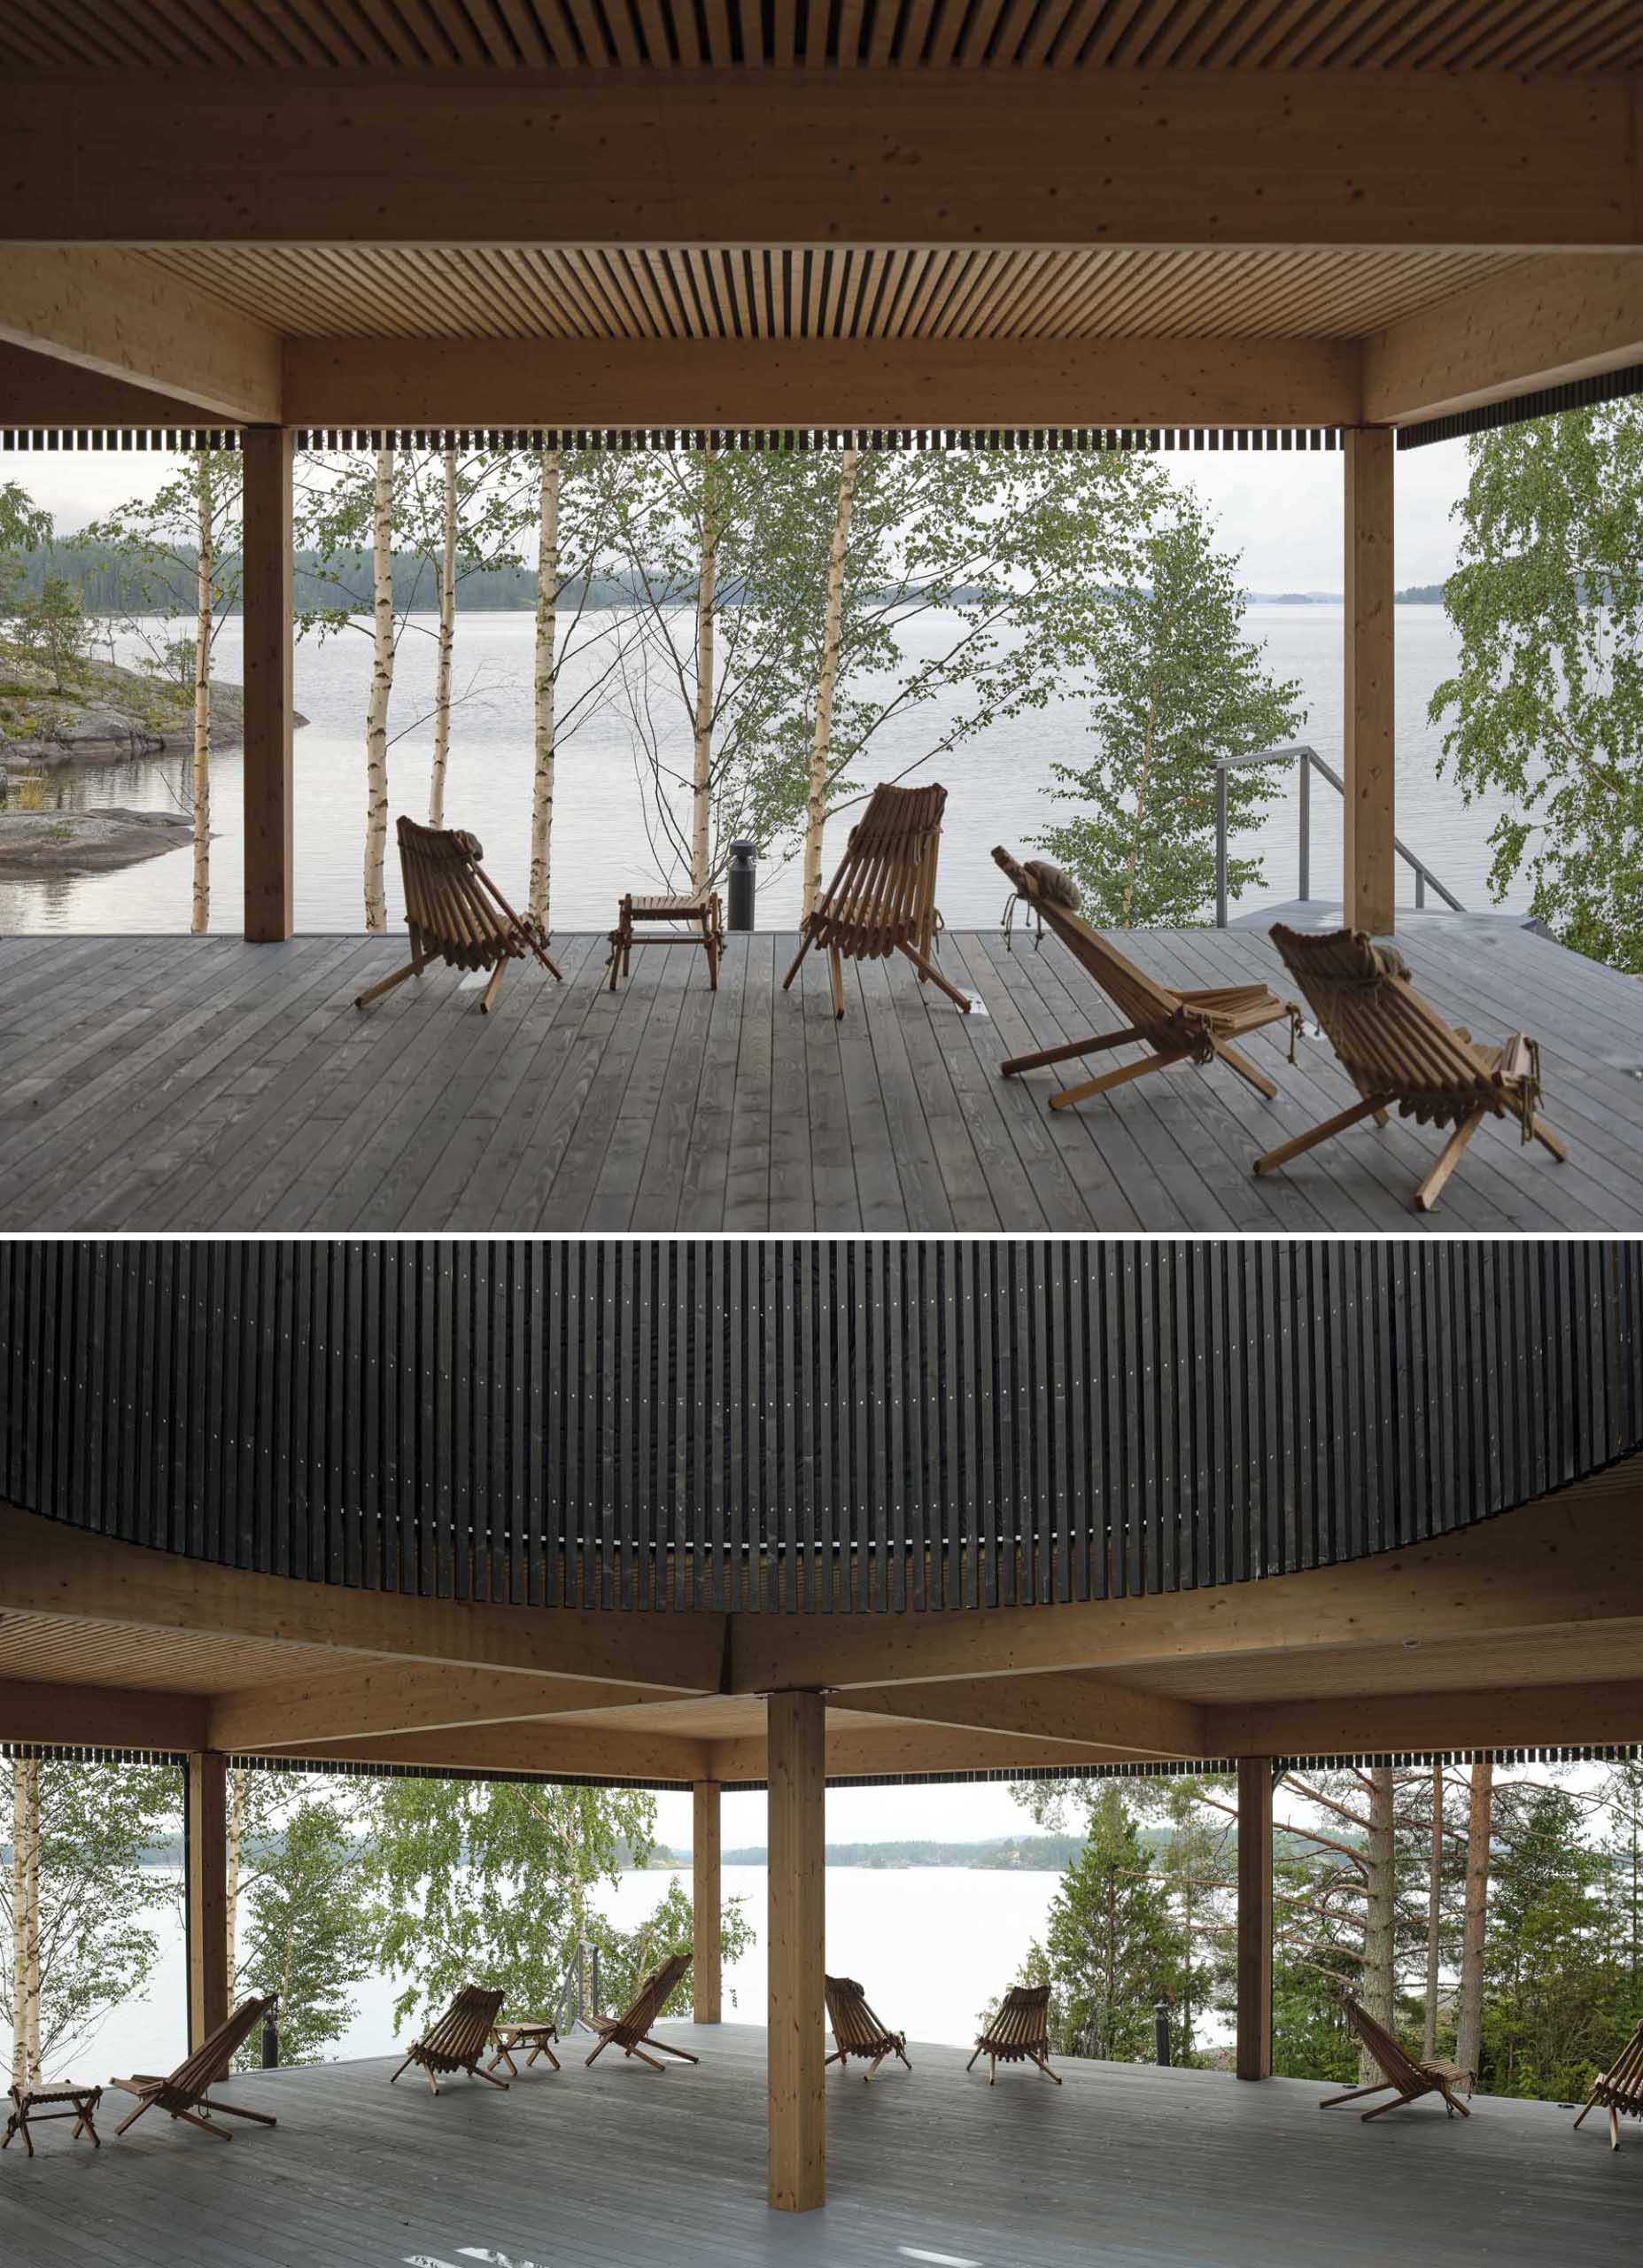 The covered sauna exteriors feature a unique, round opening in the roof, creating a thematic link between the buildings.